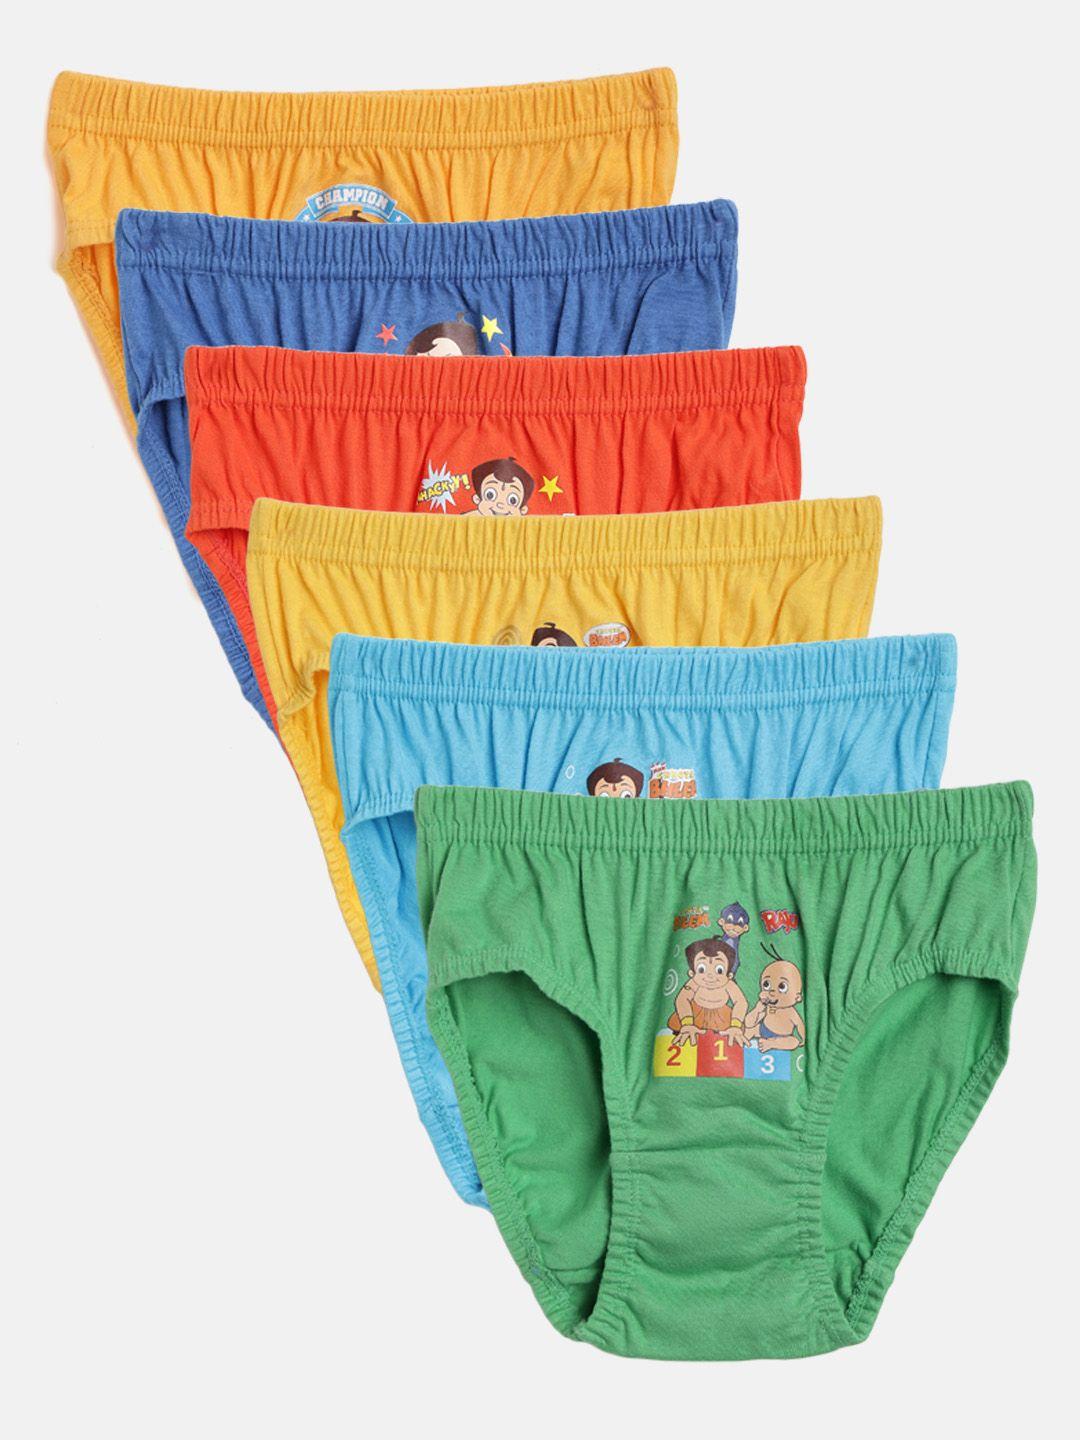 bodycare-kids-boys-pack-of-6-assorted-briefs-964abcdef-65